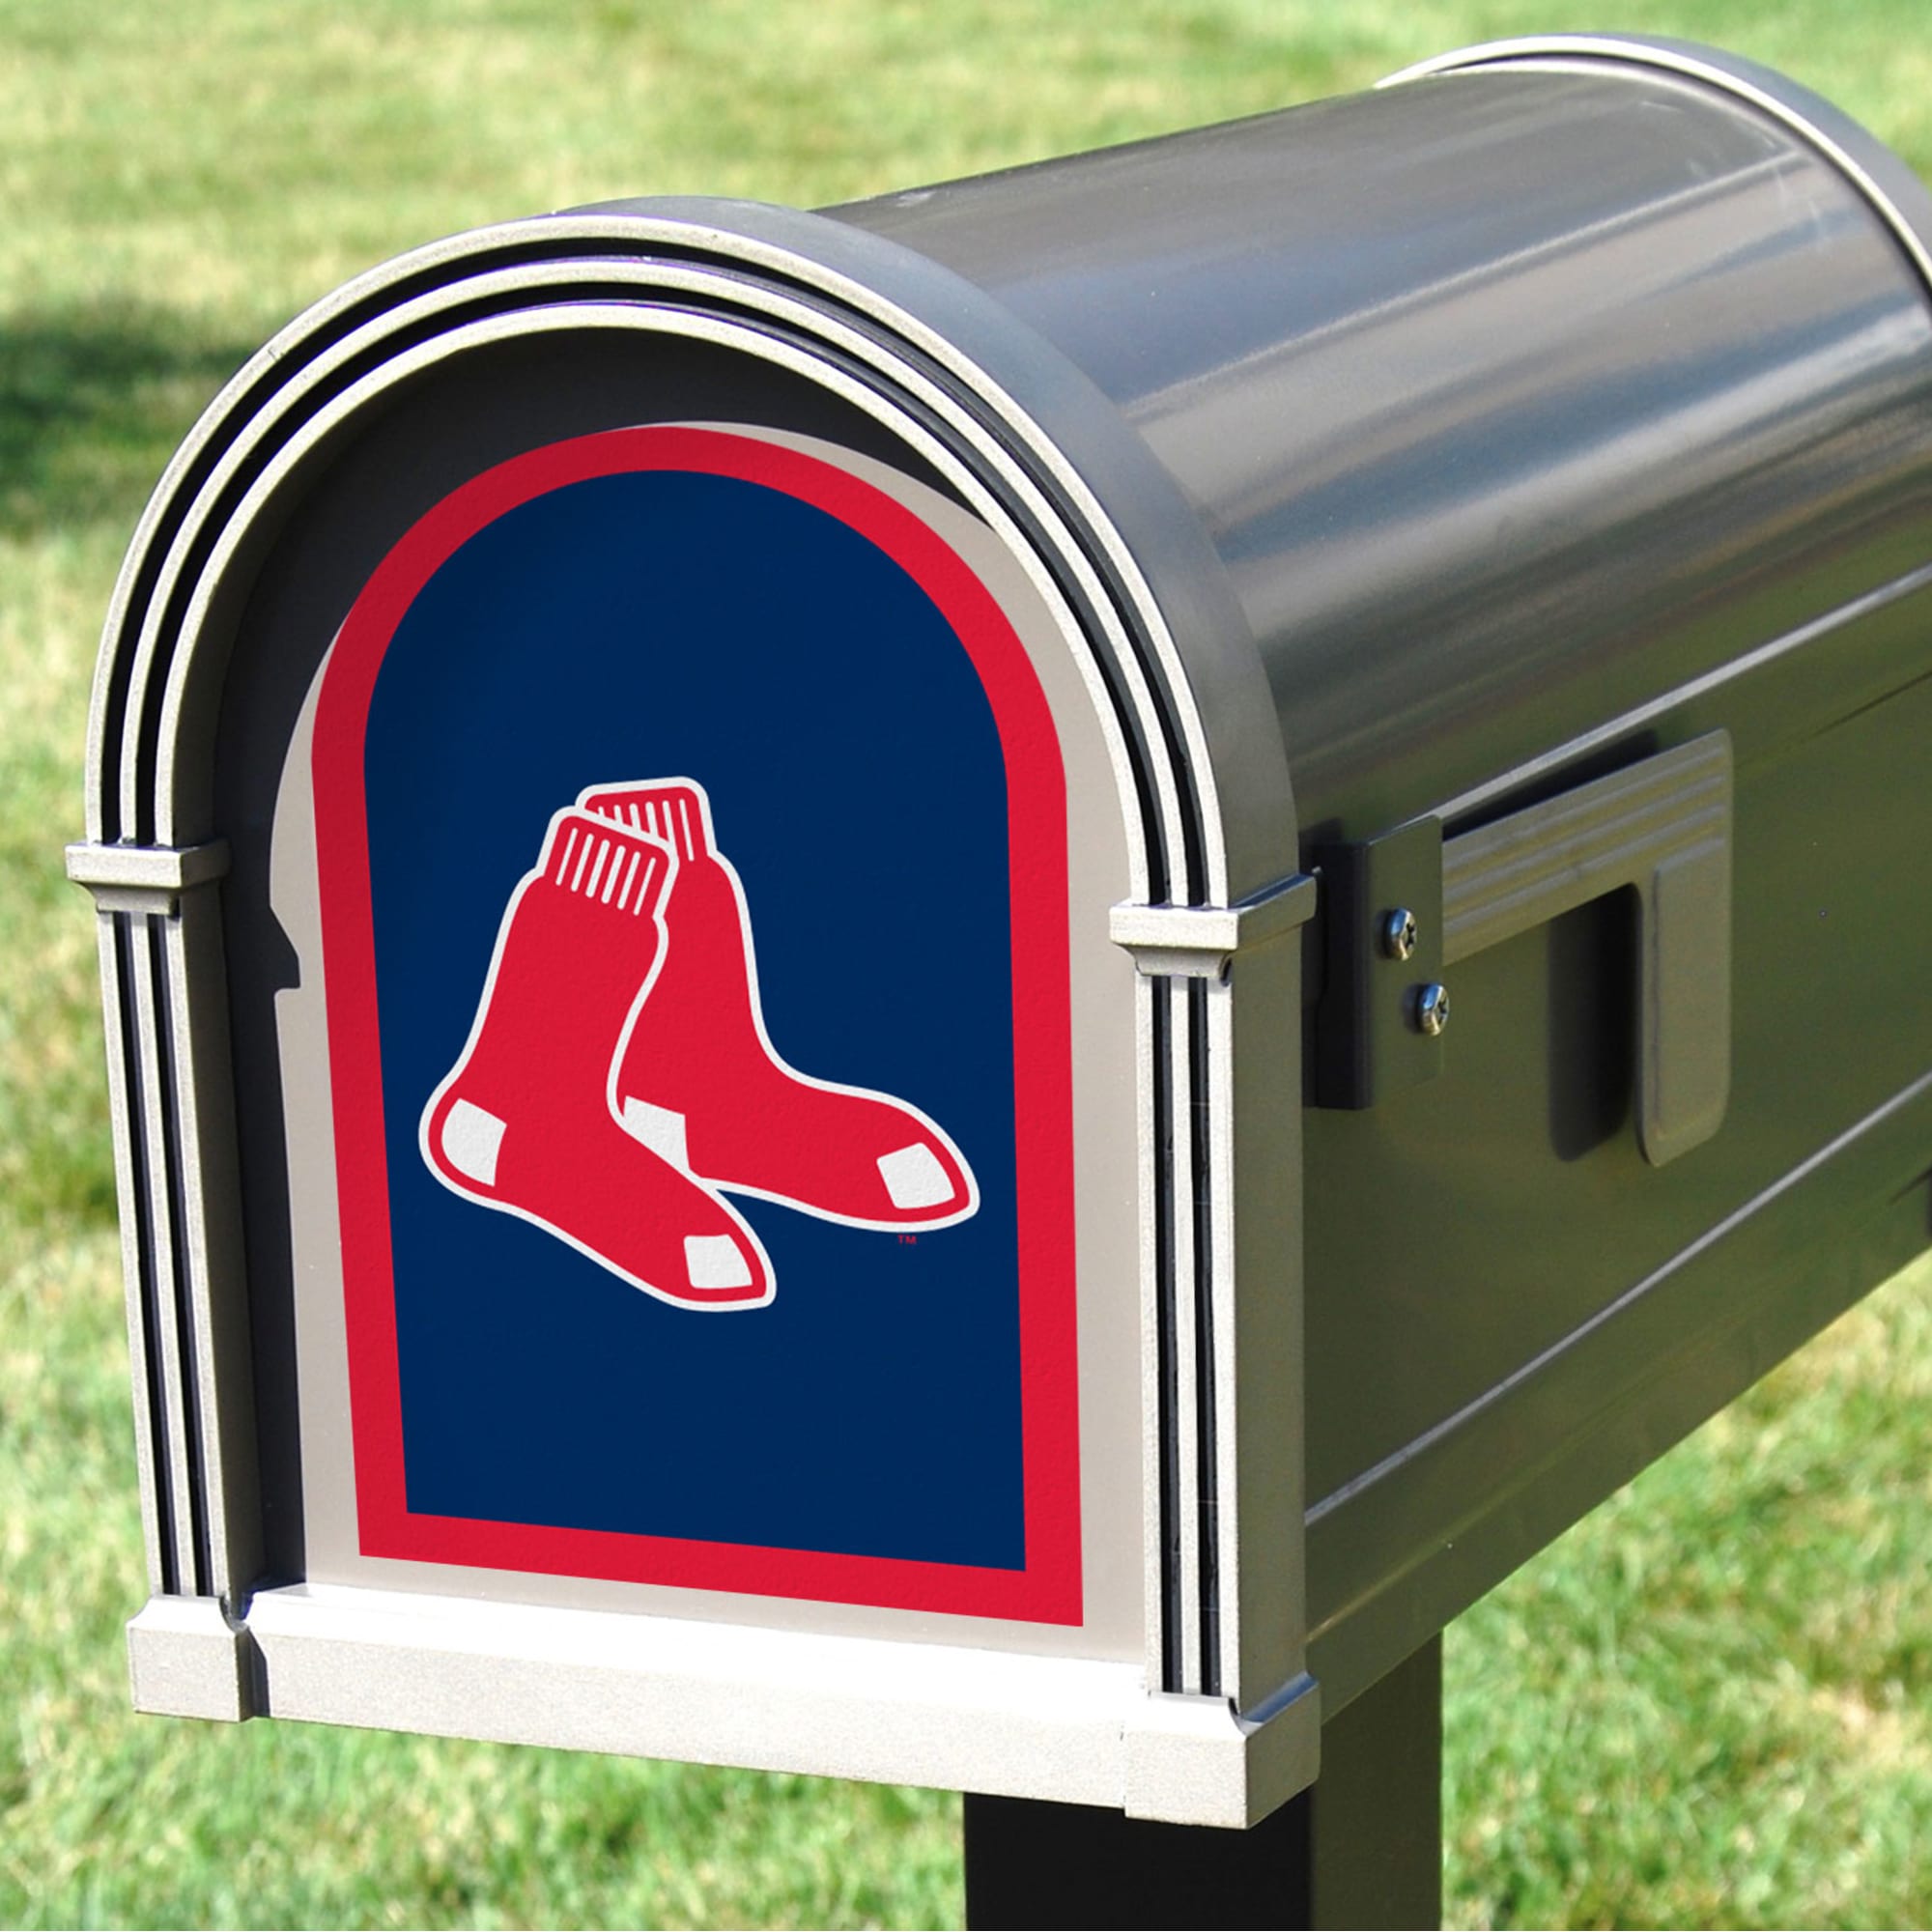 Boston Red Sox: Mailbox Logo - Officially Licensed MLB Outdoor Graphic 5.0"W x 8.0"H by Fathead | Wood/Aluminum